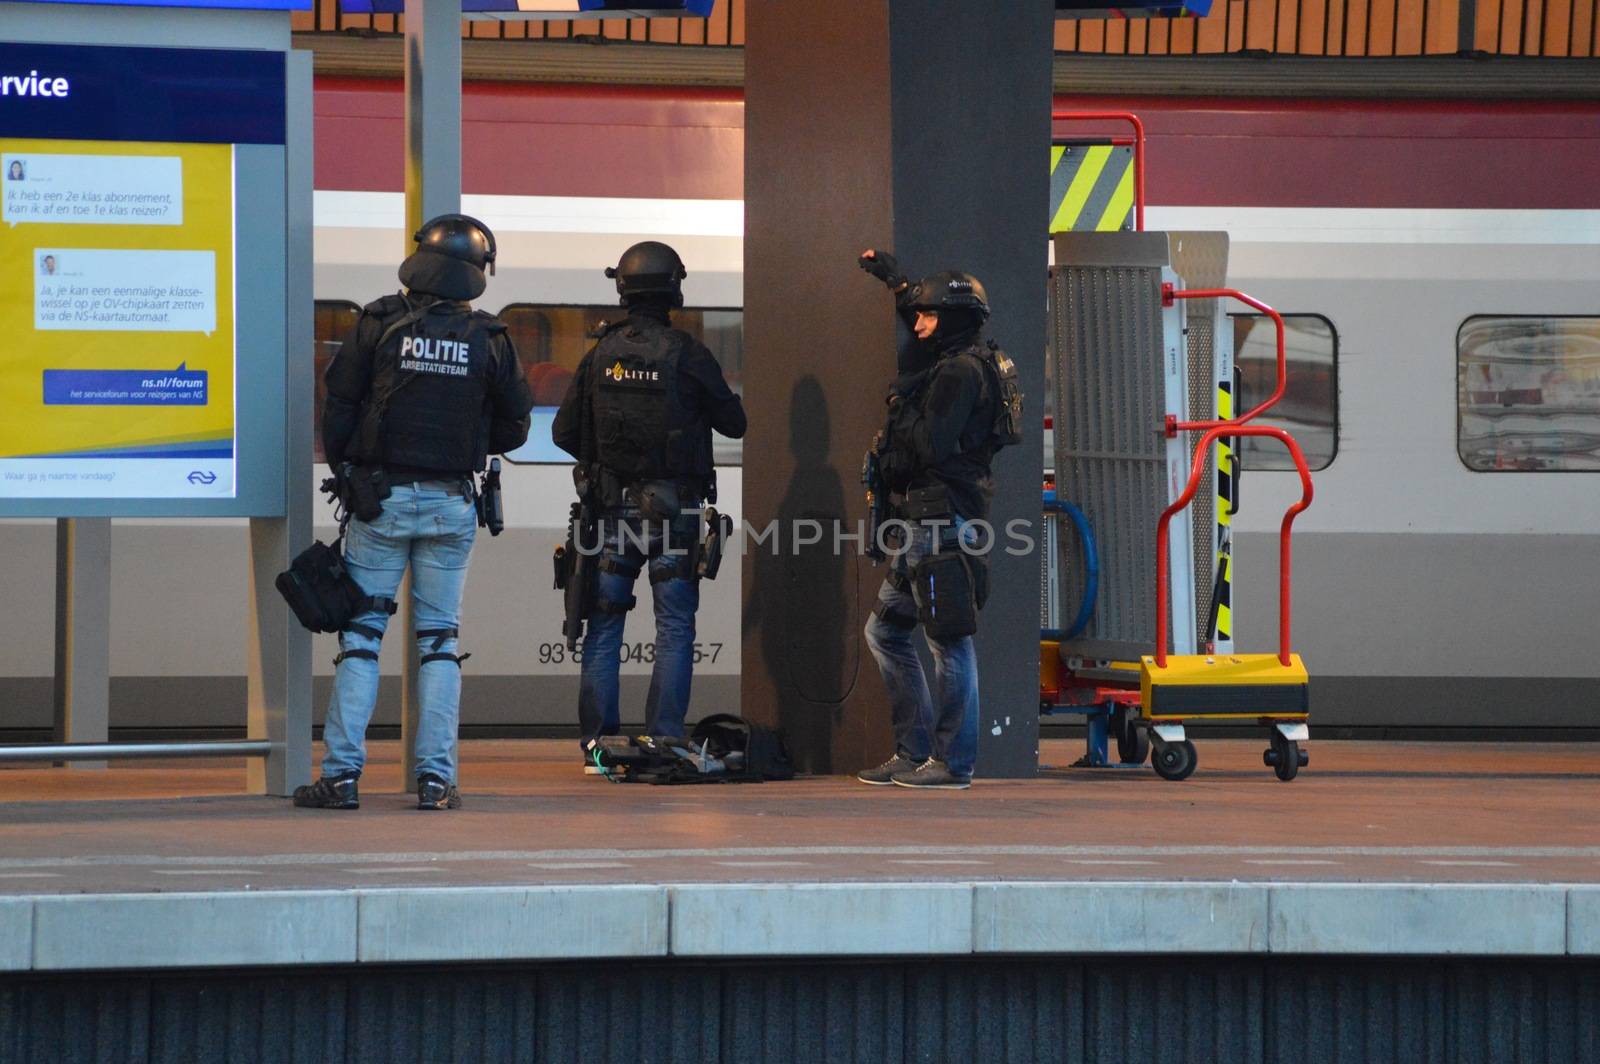 NETHERLANDS, Rotterdam: Members of a special unit of Dutch police stand guard near a Thalys train on a platform of Rotterdam central station, on September 18, 2015, as a man has locked himself in the train'sbathroom. The Thalys plus several platforms have been evicted.